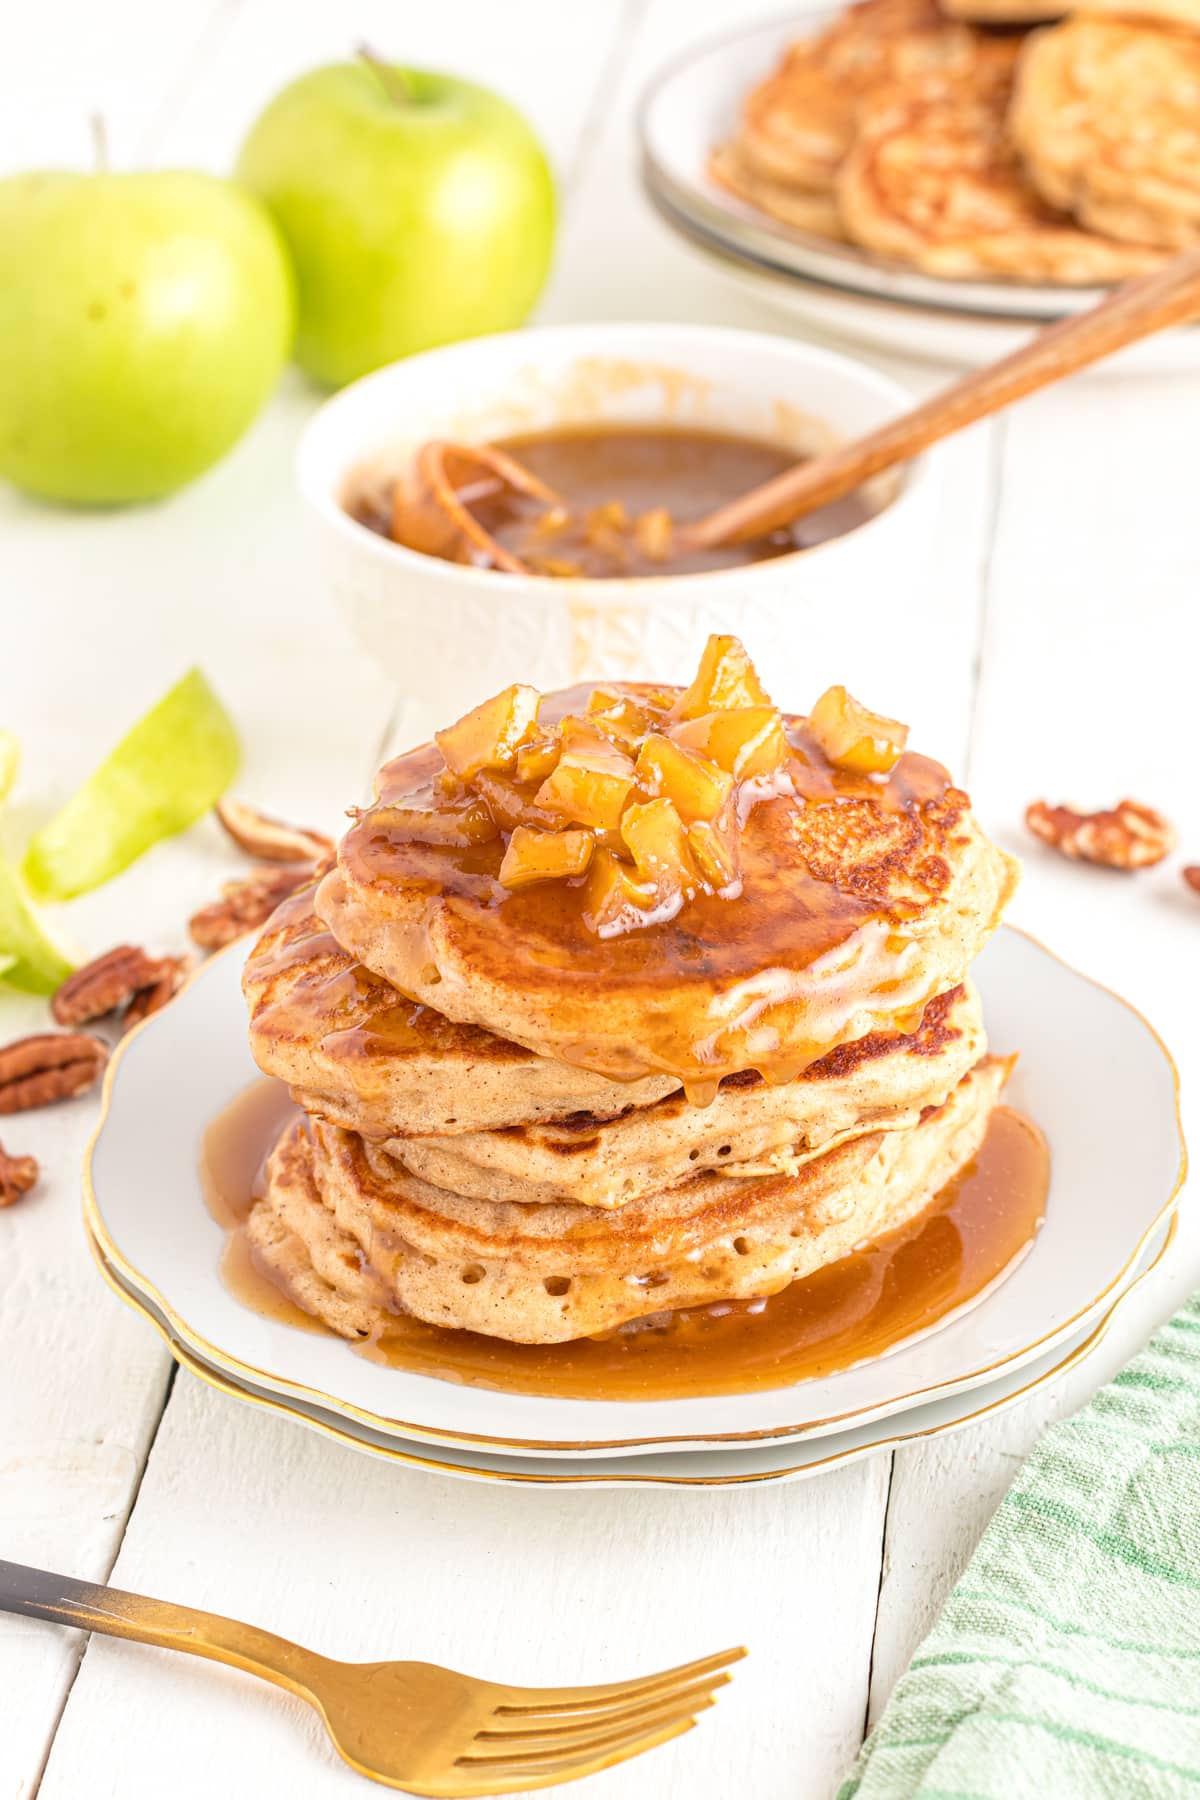 Caramel apple pancakes on table with extra caramel bowl for serving.